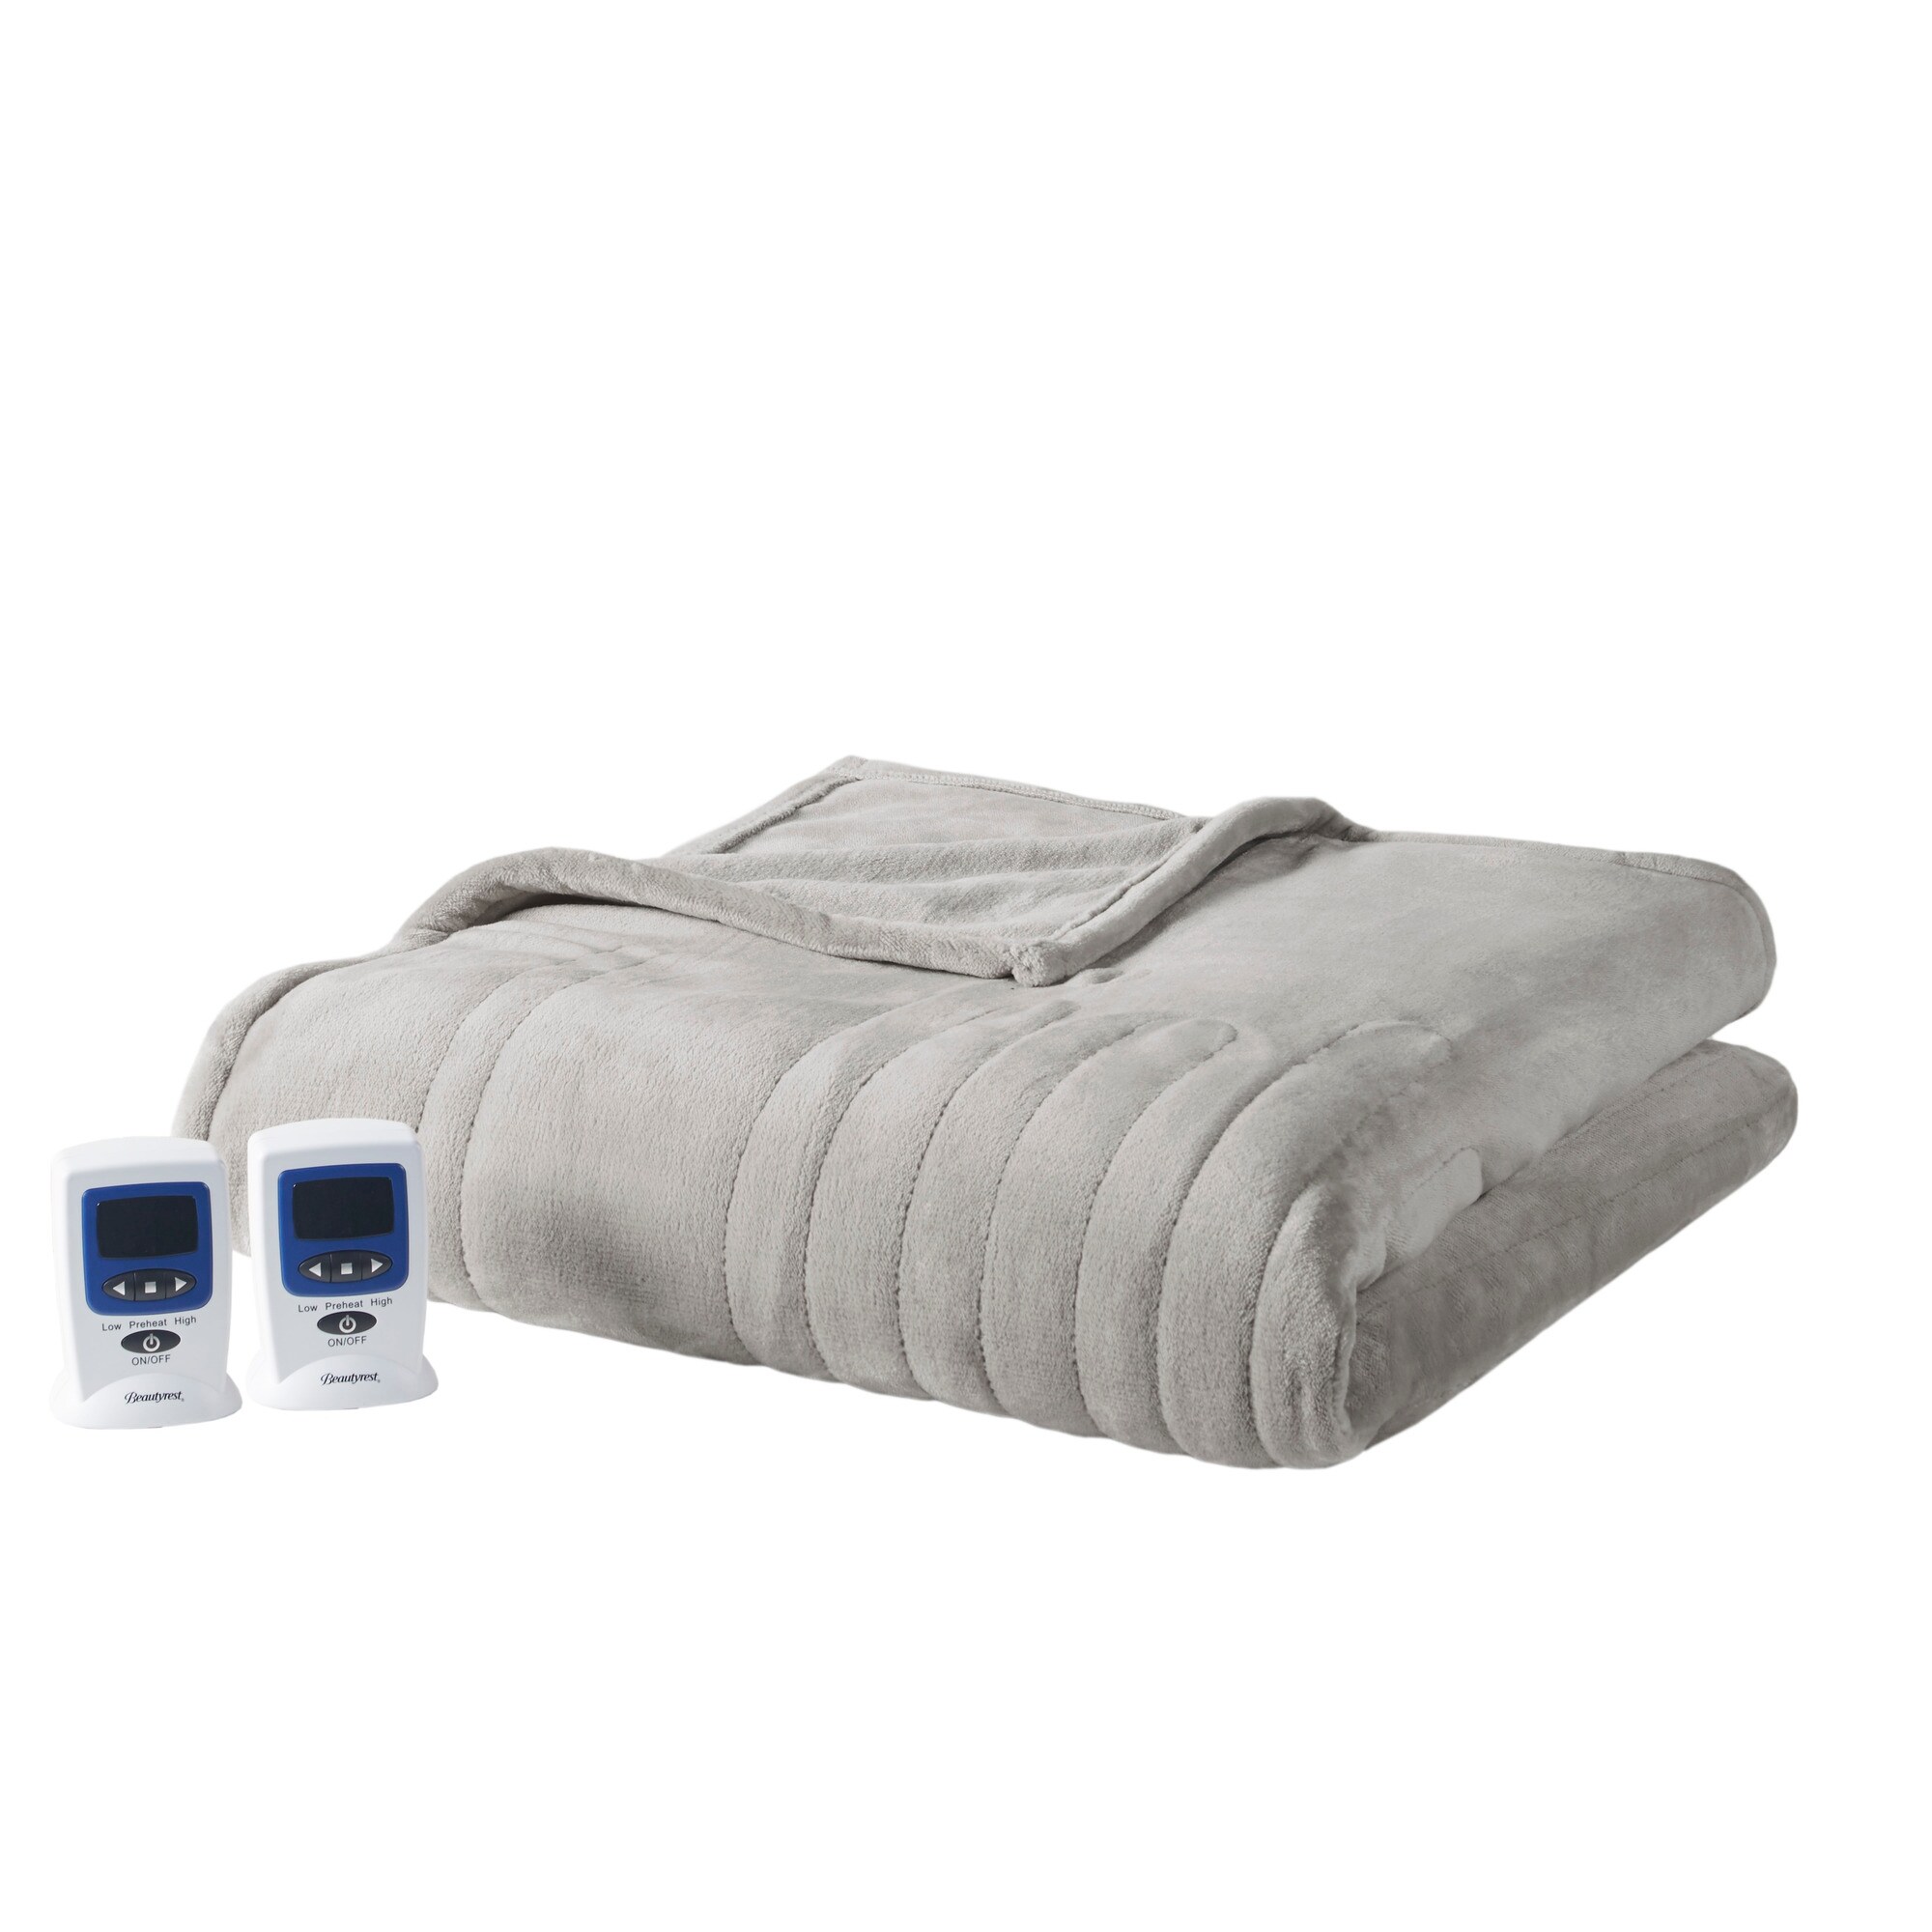 https://ak1.ostkcdn.com/images/products/is/images/direct/0da4949bc6fd3324bd60c4b21c45135c7f839191/Beautyrest-Microplush-Heated-Blanket-with-Wifi-Technology.jpg